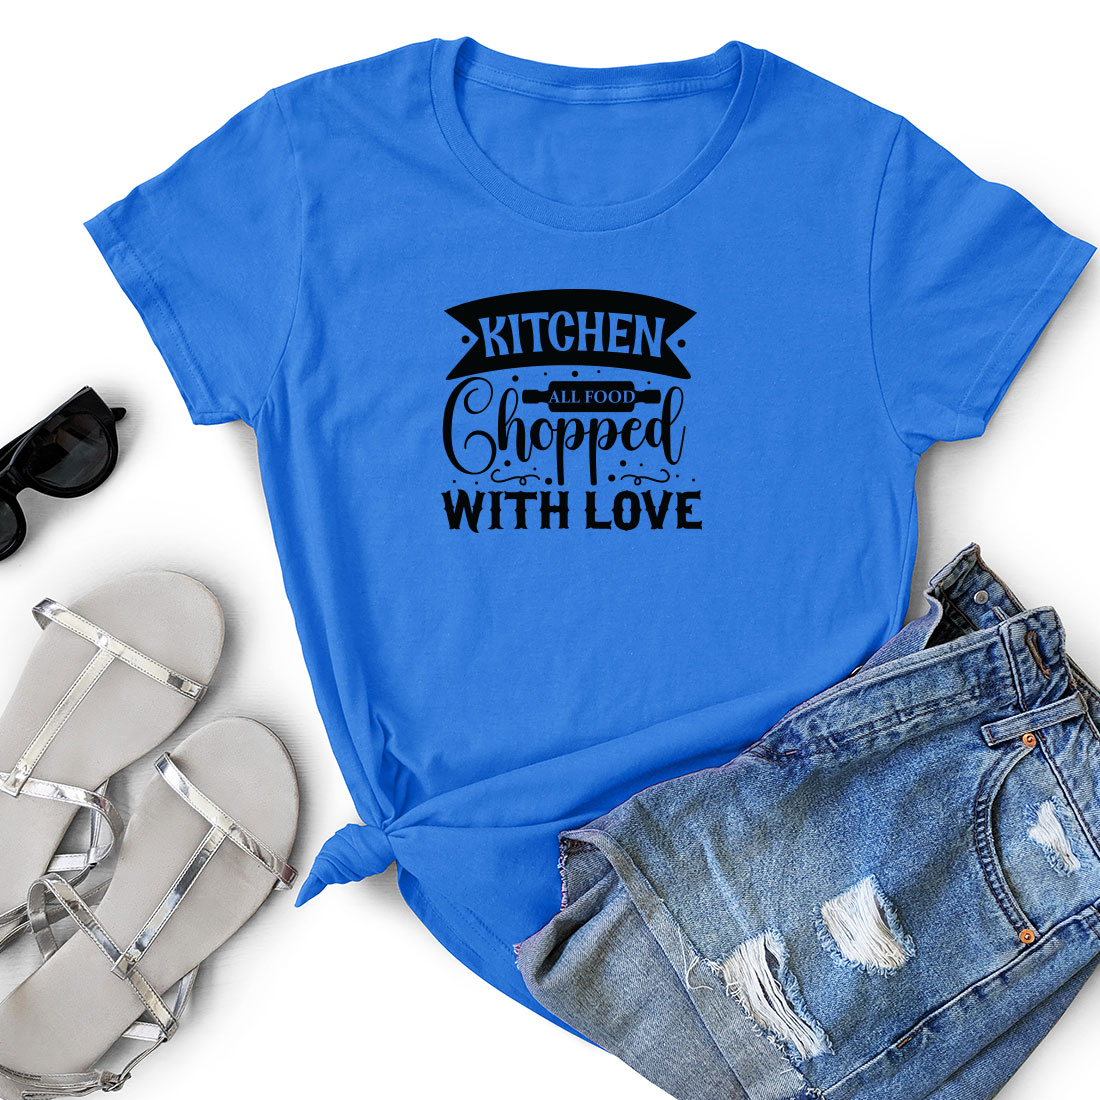 T - shirt that says kitchen is always stopped with love.